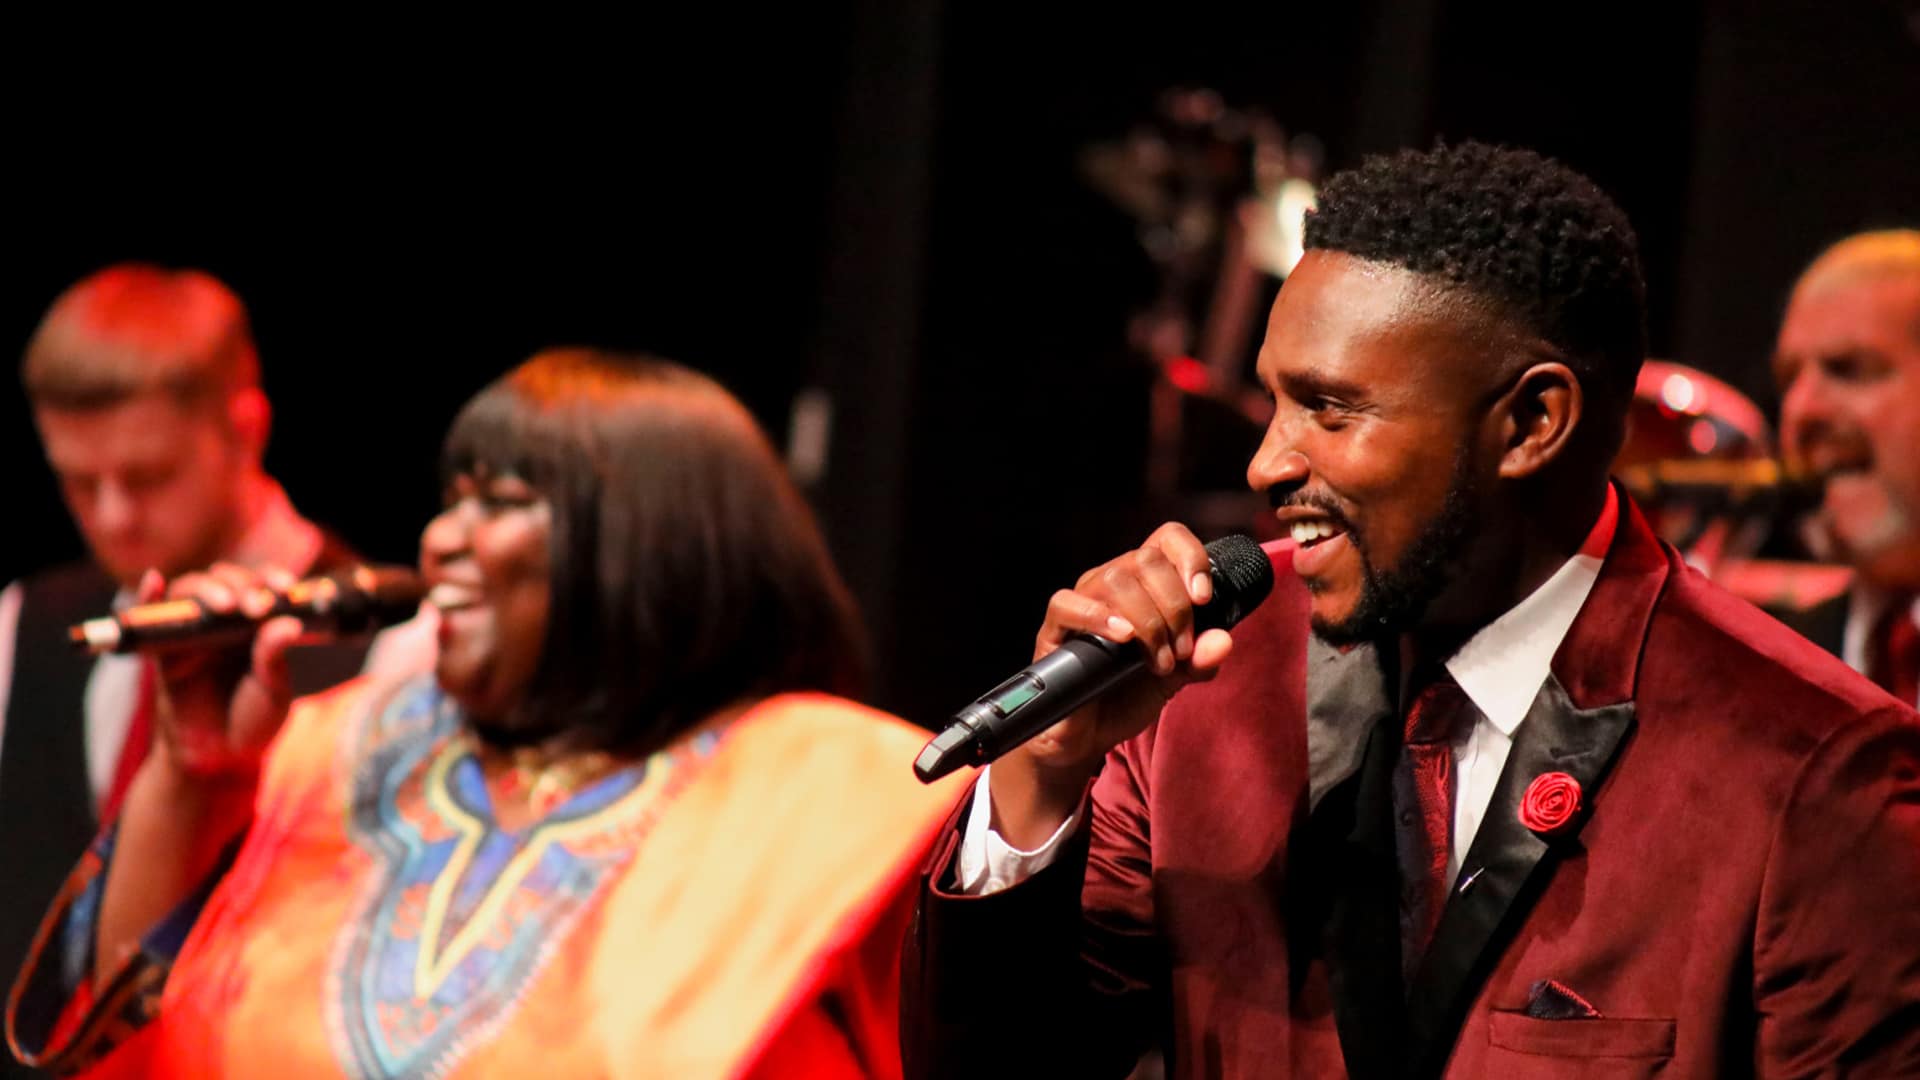 RUSH: A Joyous Jamaican Journey production photo. (Left to right) A black woman wearing an orange dress with a blue and light orange patten down the centre and a black man wearing a red velvet jacket over a white shirt and black tie sing into microphones.